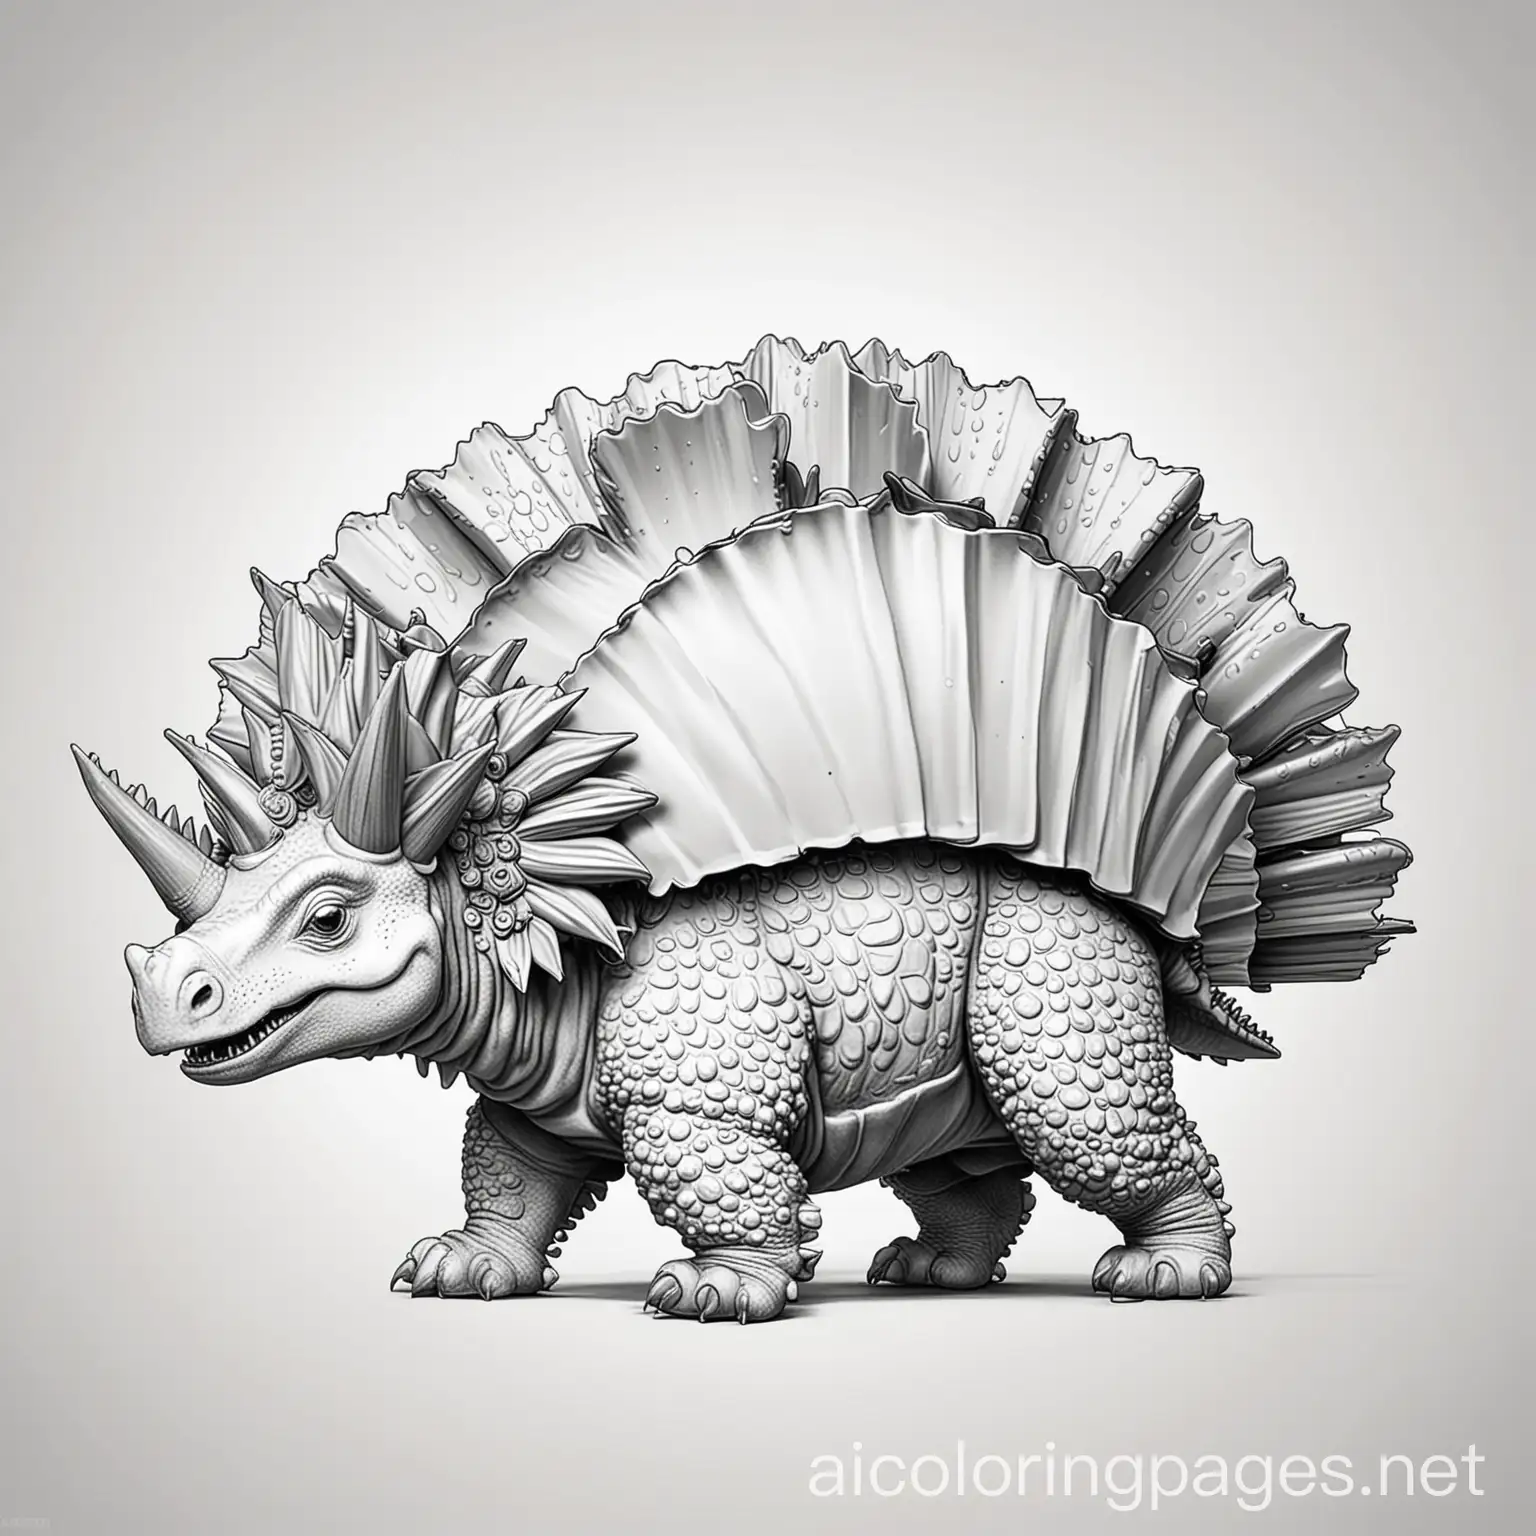 Playful Stegosaurus with plates on its back, Coloring Page, black and white, line art, white background, Simplicity, Ample White Space. The background of the coloring page is plain white to make it easy for young children to color within the lines. The outlines of all the subjects are easy to distinguish, making it simple for kids to color without too much difficulty